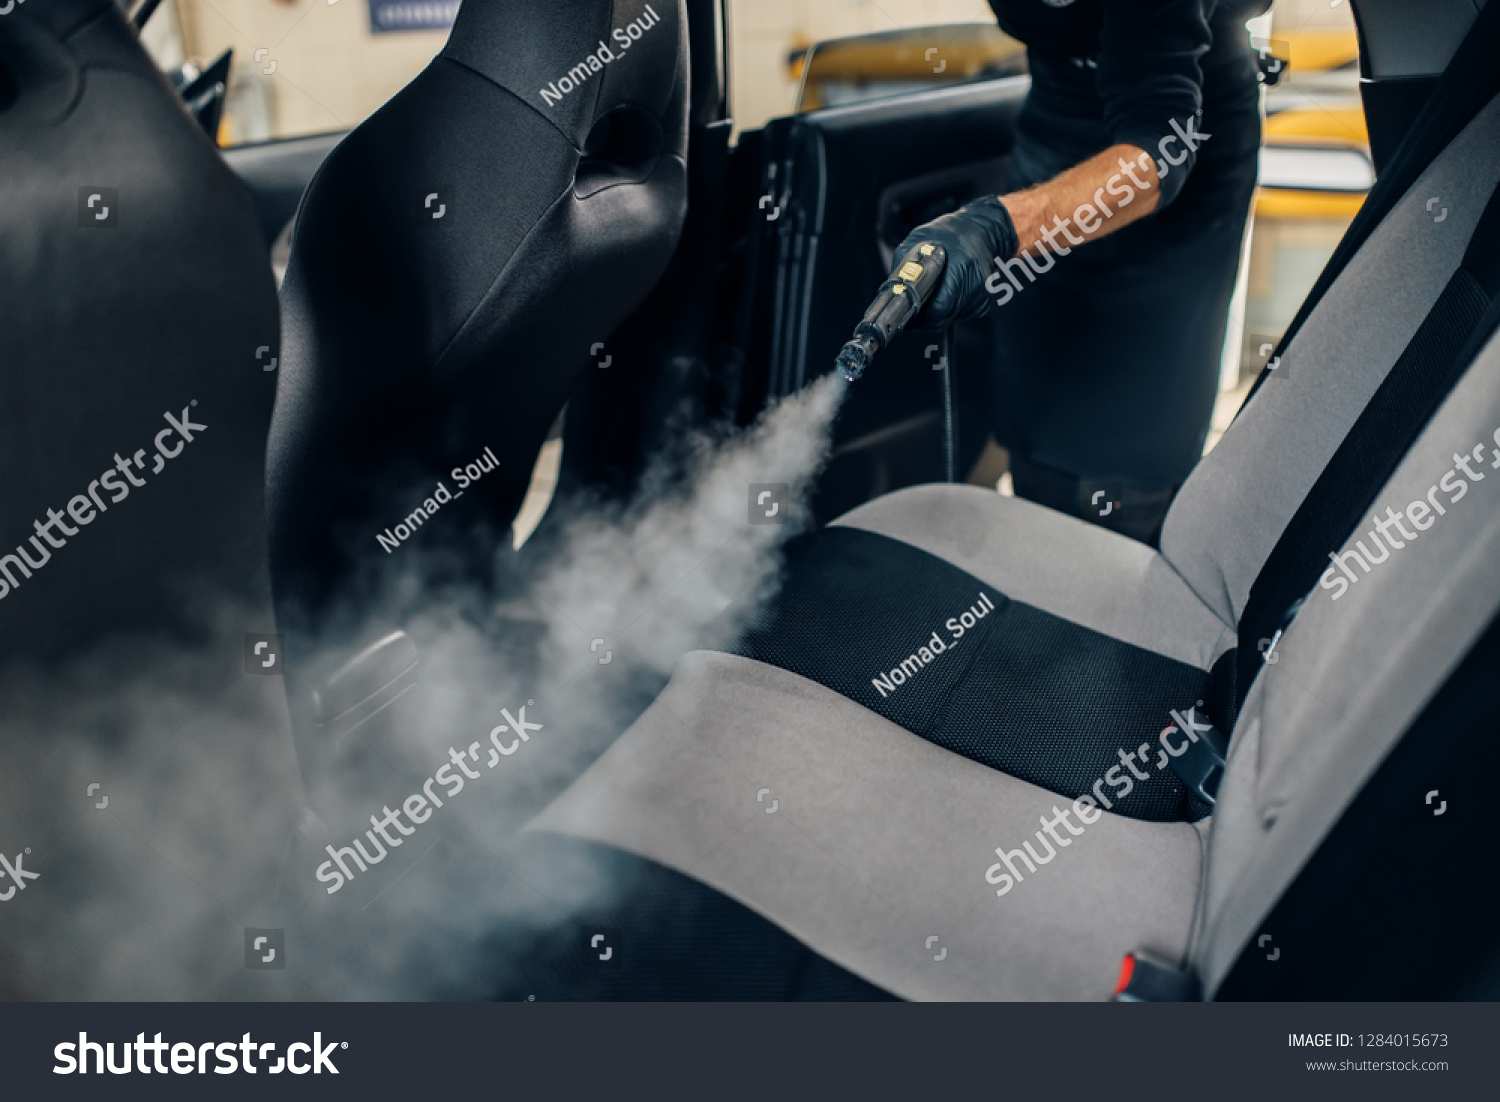 Carwash, worker cleans seats with steam cleaner #1284015673